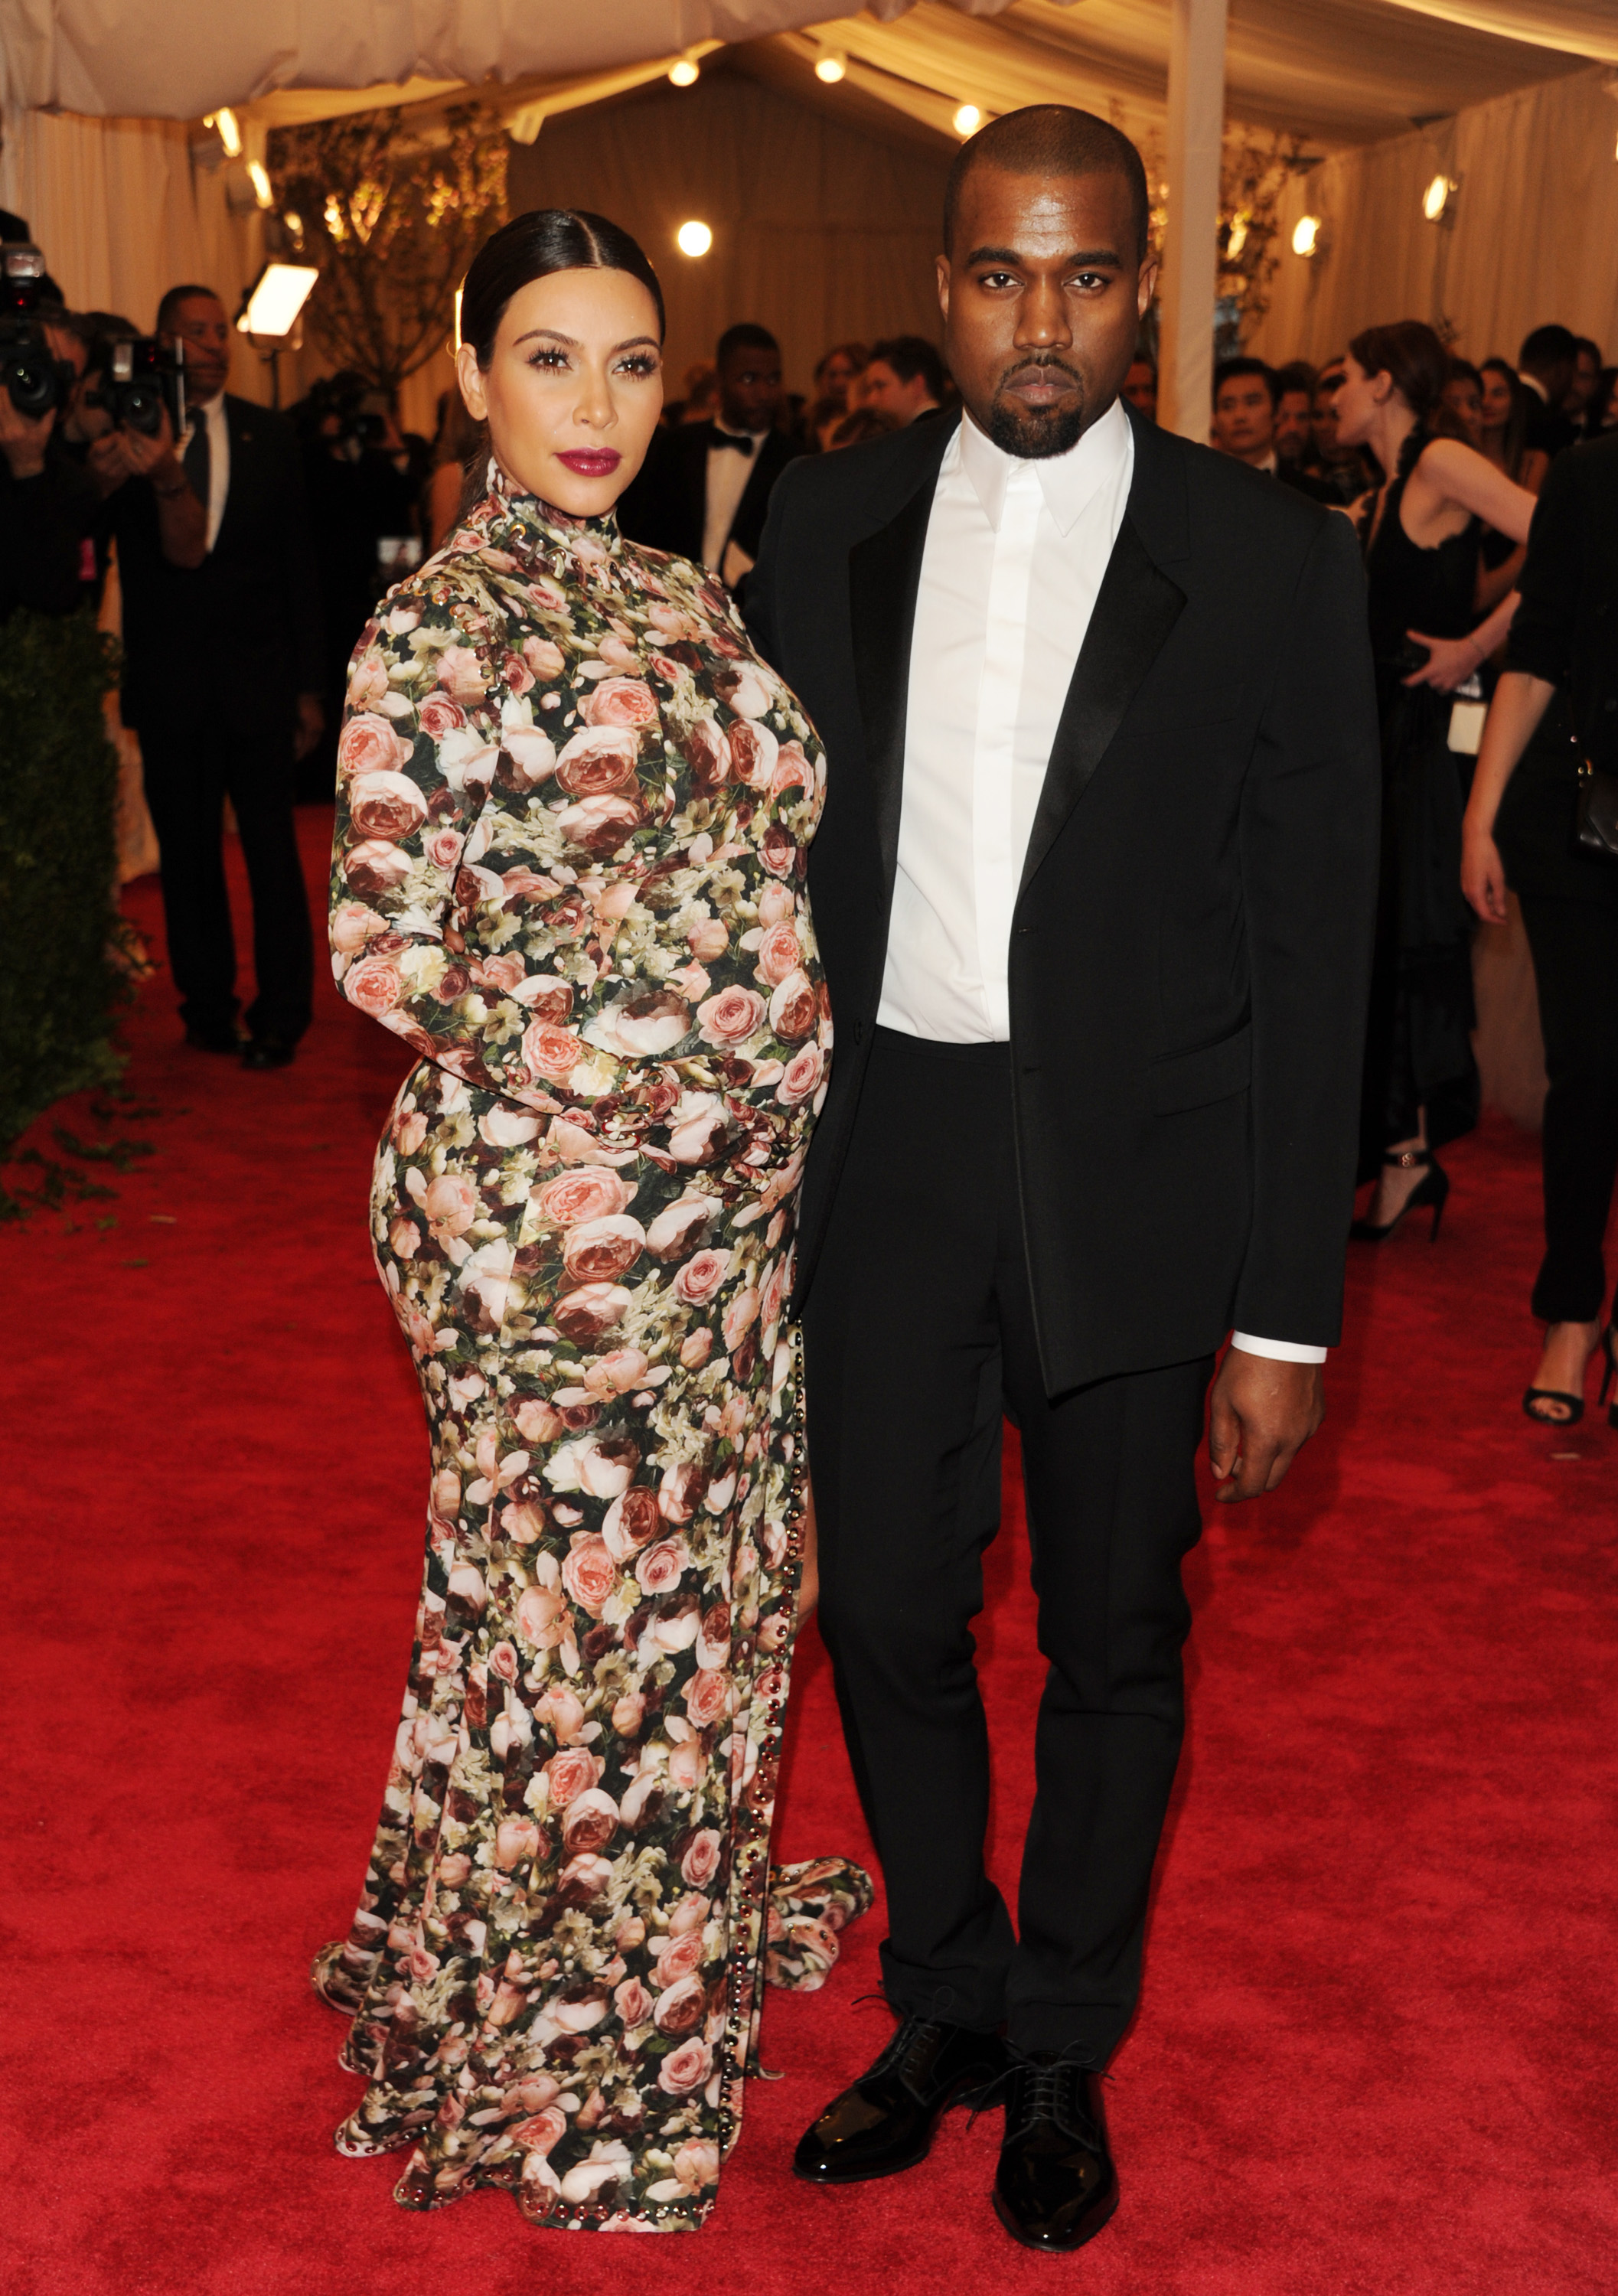 Kim Kardashian and Kanye West attend The Metropolitan Museum of Art's Costume Institute benefit celebrating "PUNK: Chaos to Couture" on Monday, May 6, 2013, in New York. (Photo by Evan Agostini/Invision/AP)